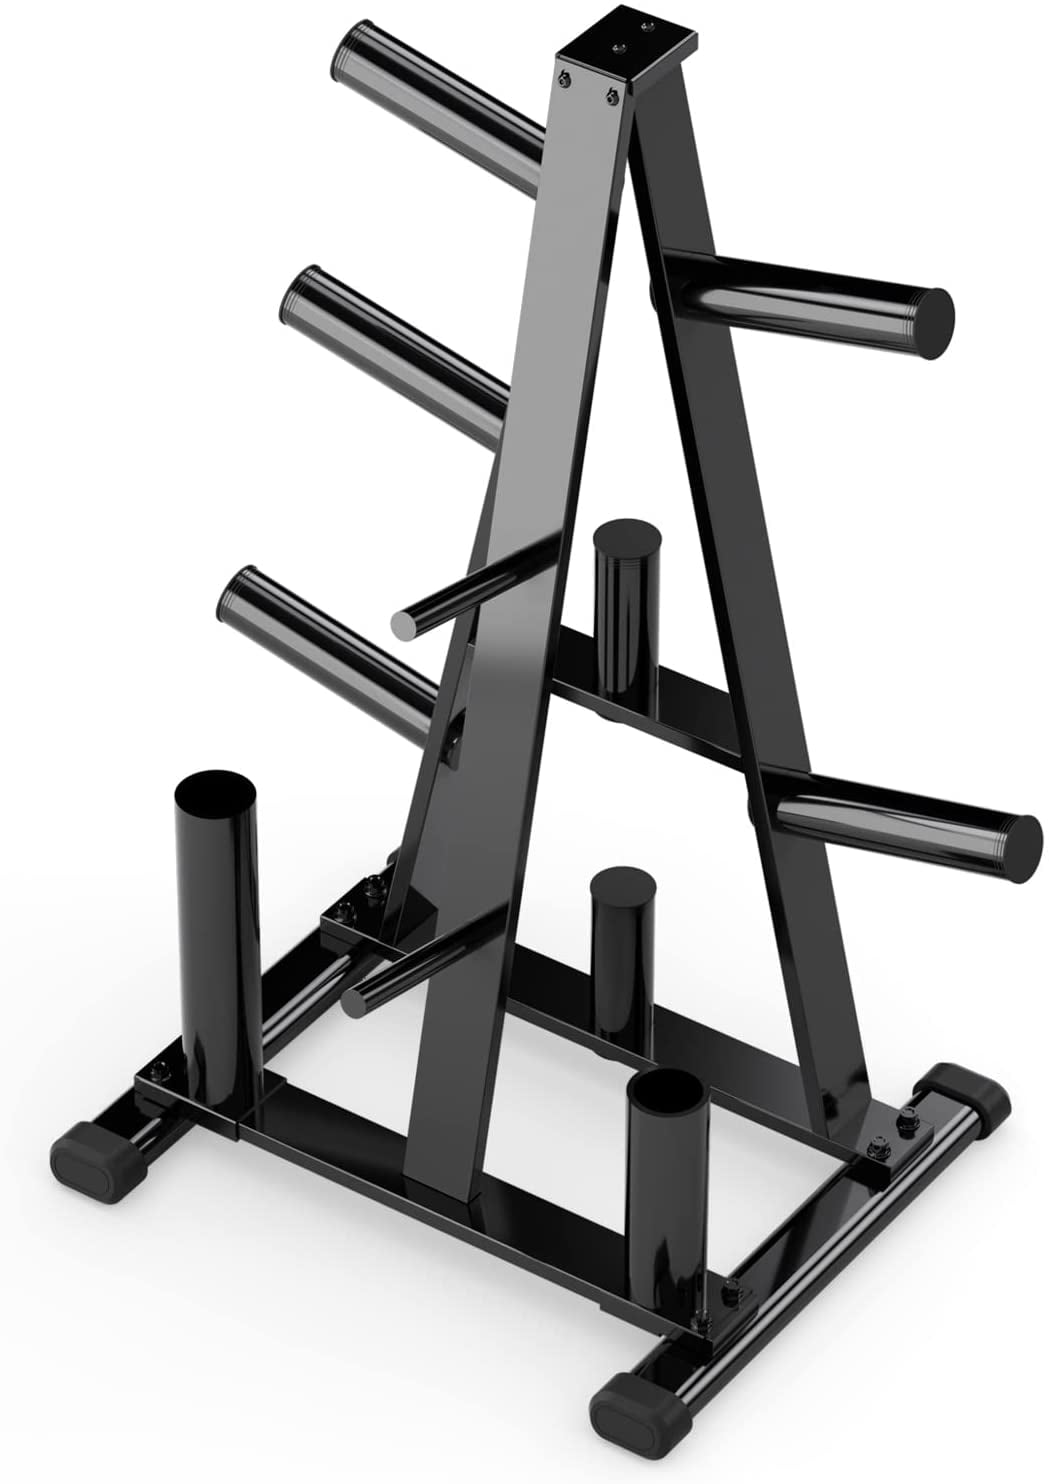 Weight Plate Rack 2-Inch Olympic Gym Tree Stand Holder Black Steel 500-Pounds 